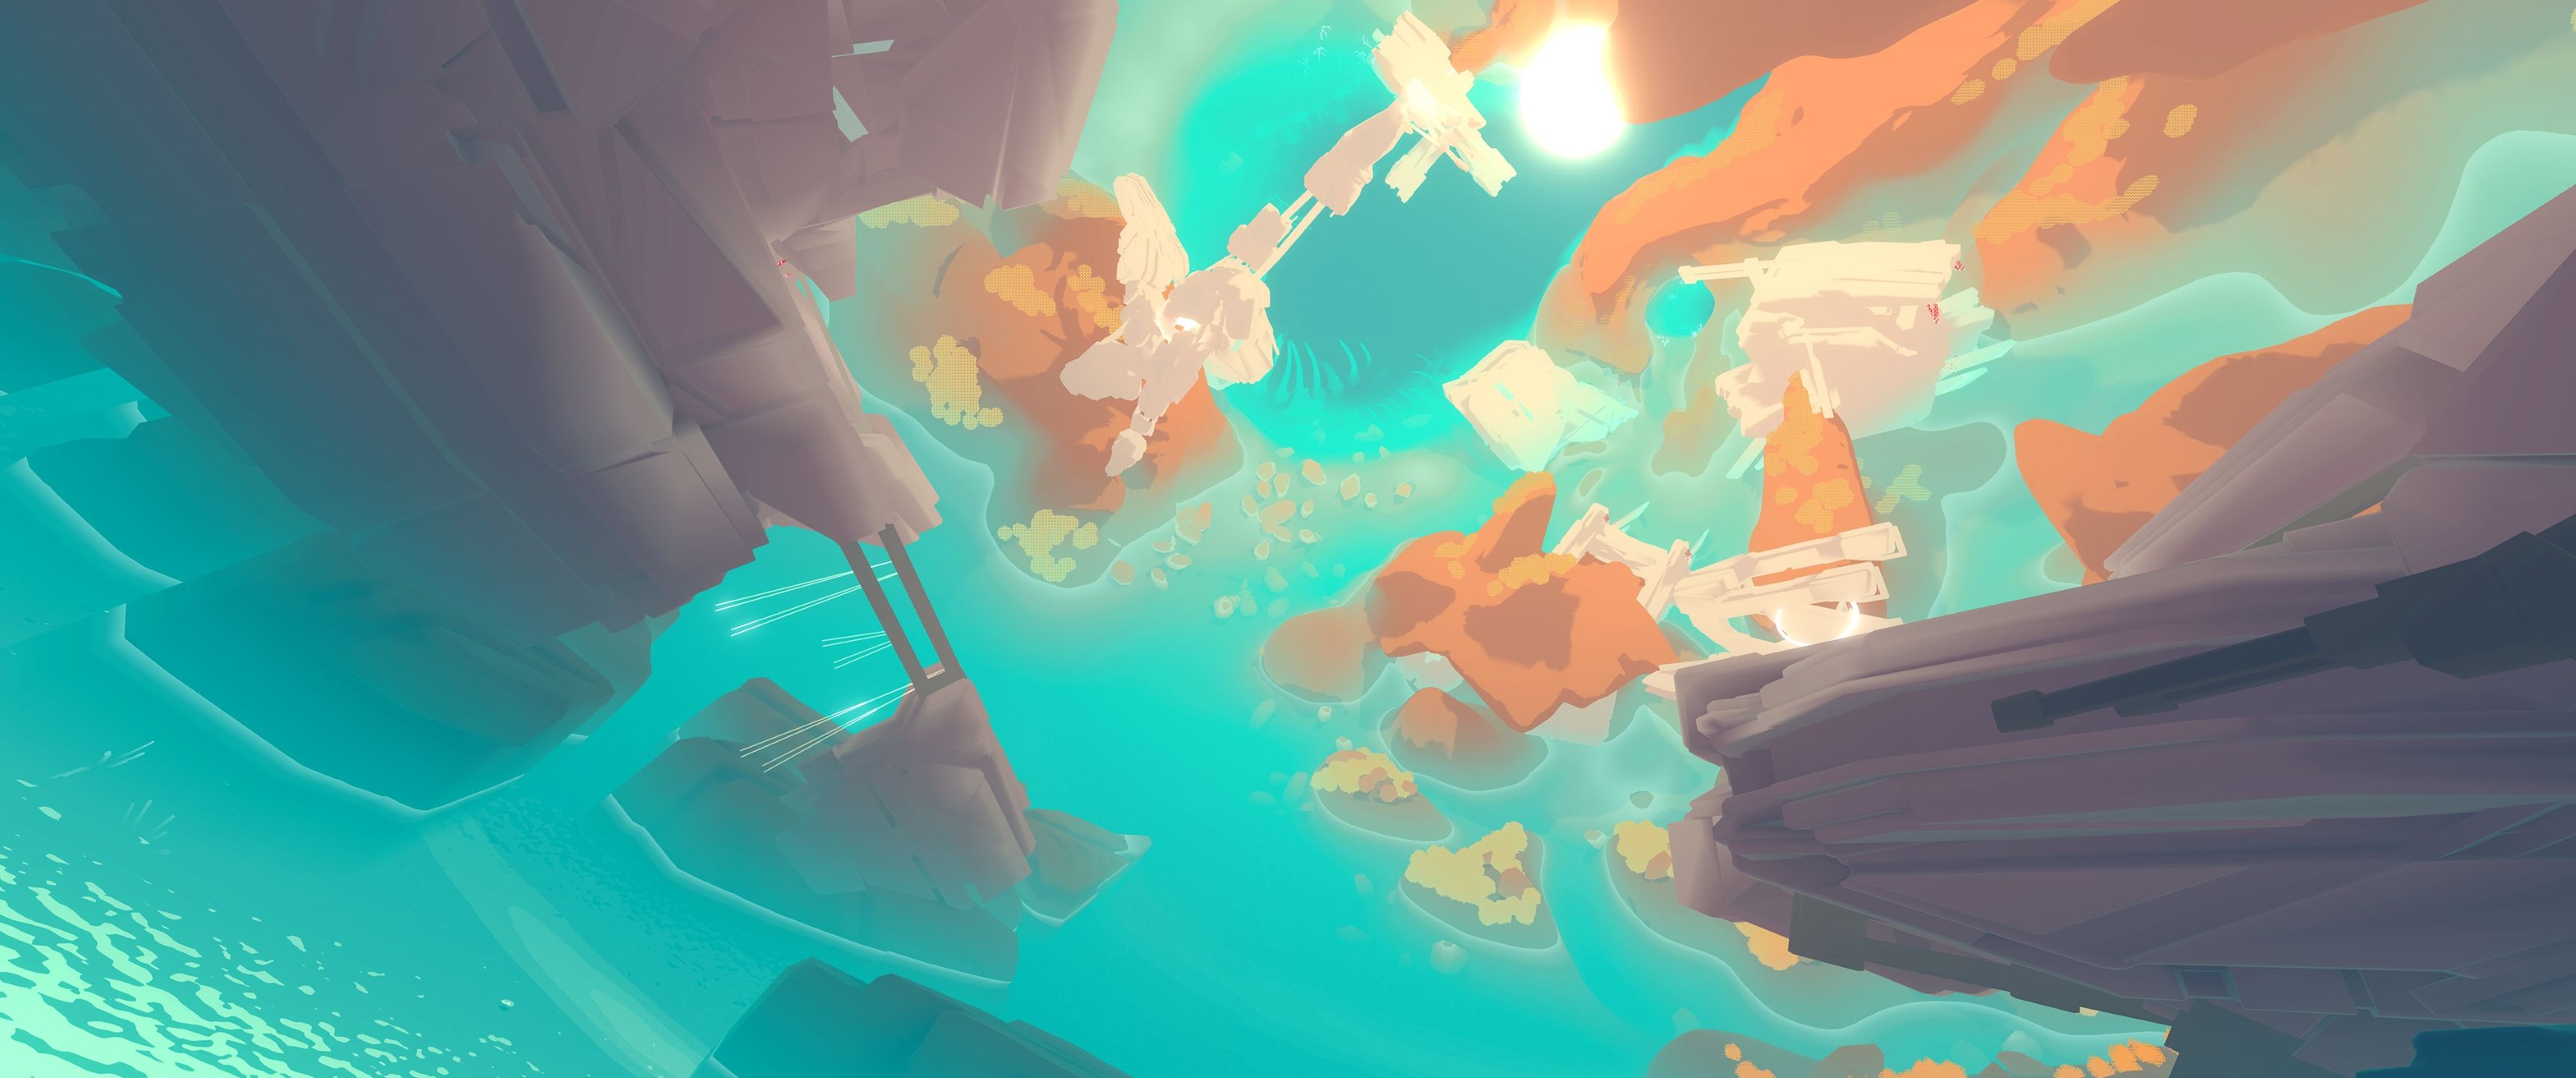 InnerSpace • PolyKnight Games [3440×1440]